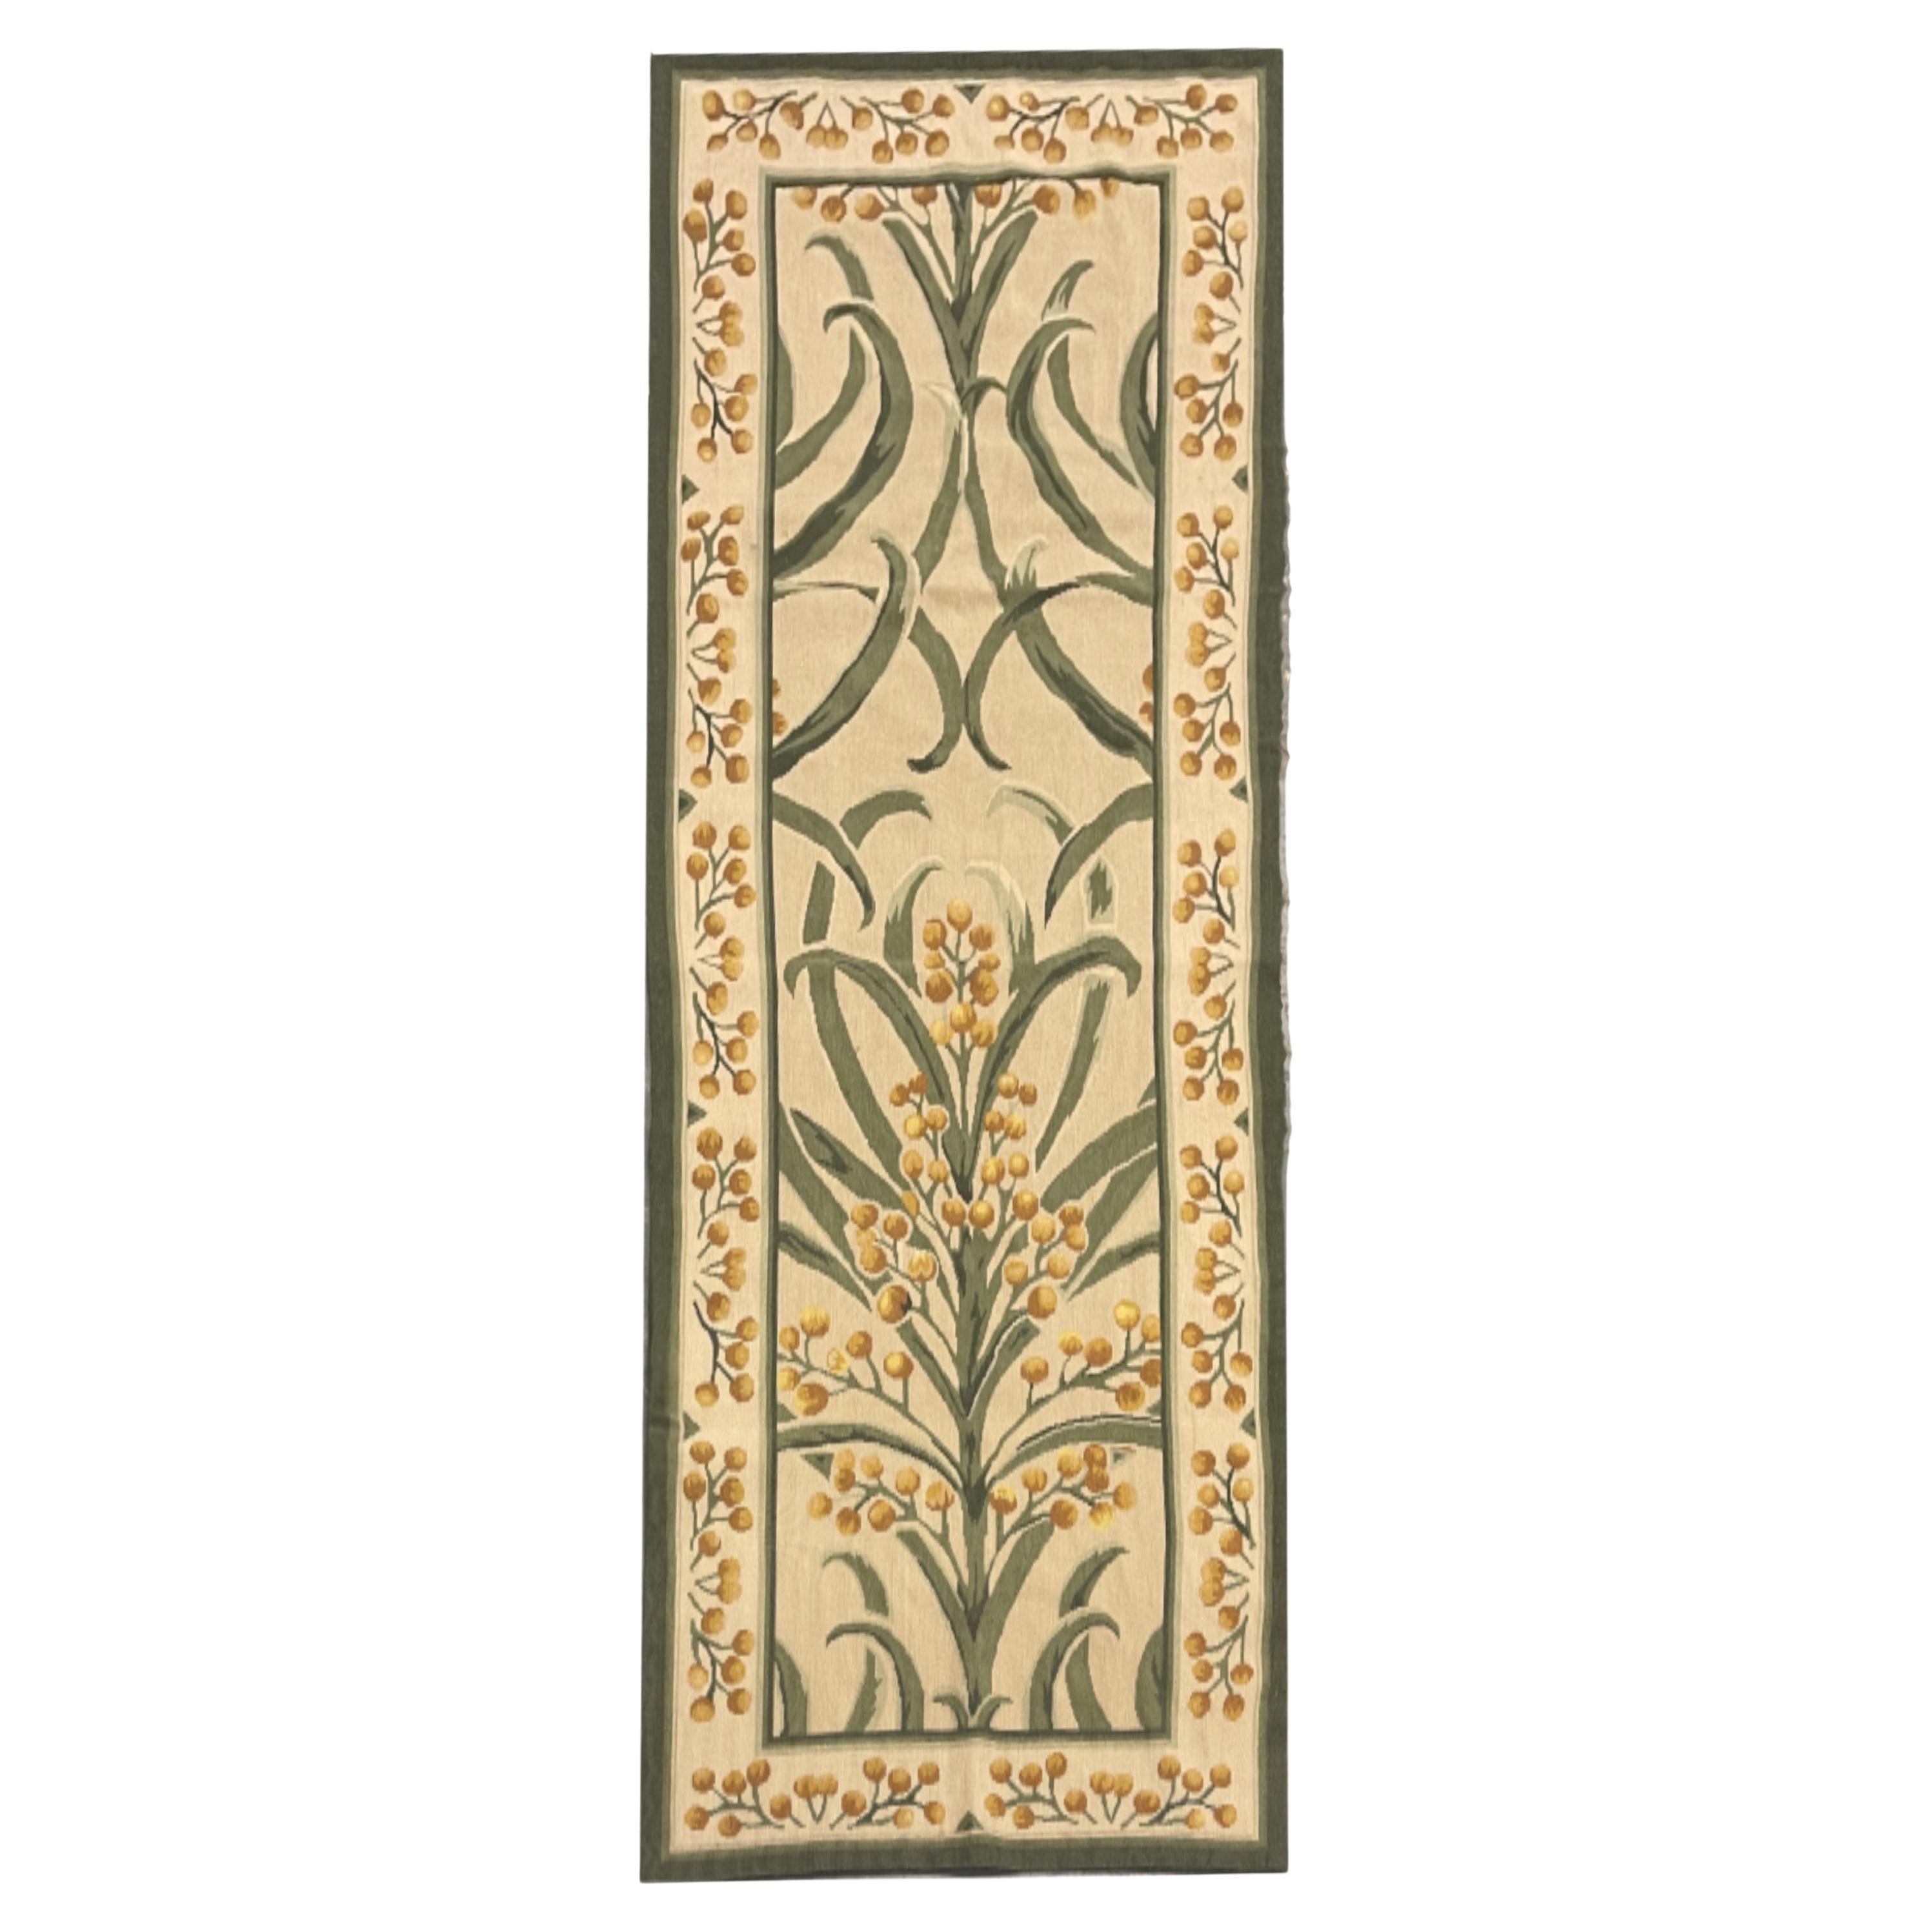 Botanical Aubusson Rug Green Beige Handwoven Wool Needlepoint Traditional Carpet For Sale